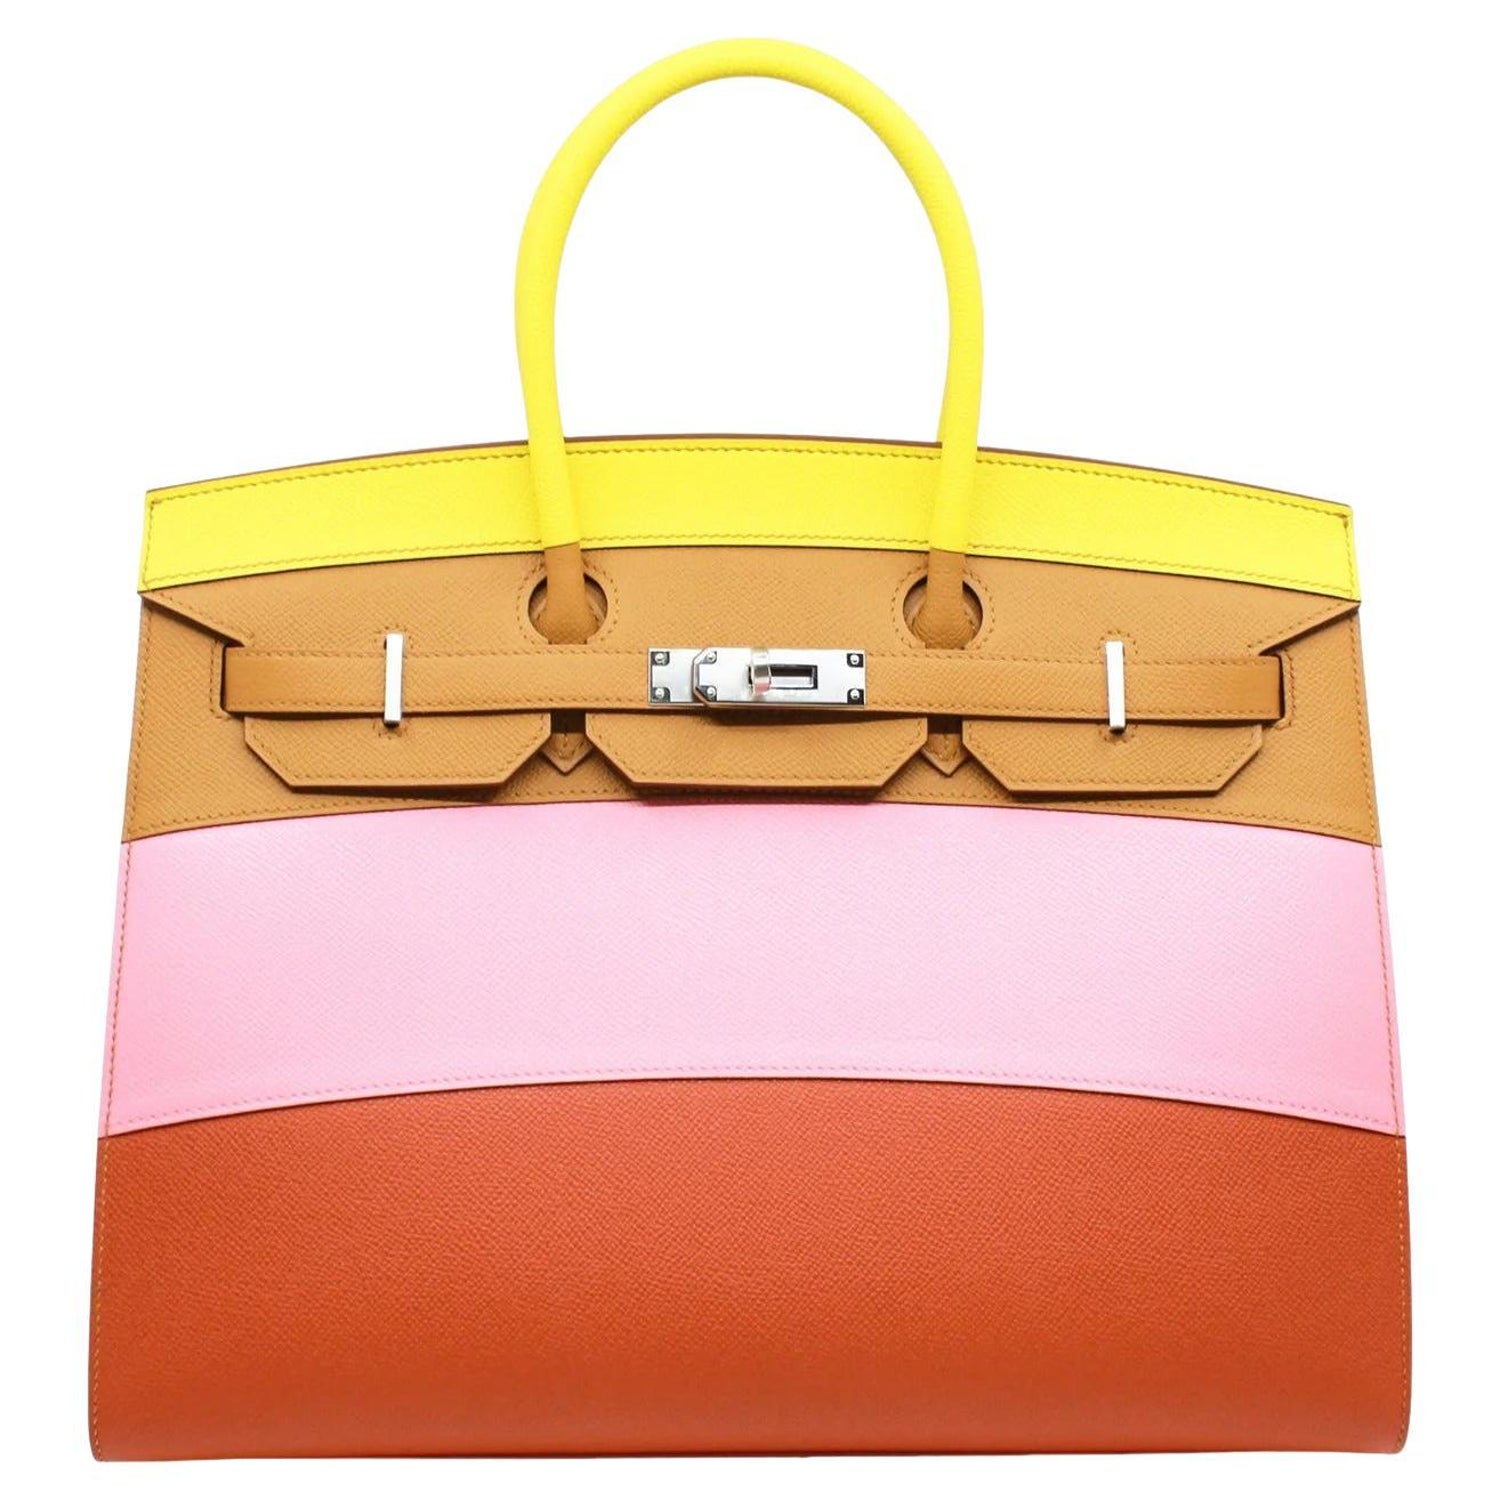 Hermès Rose Confetti Chevre Birkin 30cm Gold Hardware Available For  Immediate Sale At Sotheby's